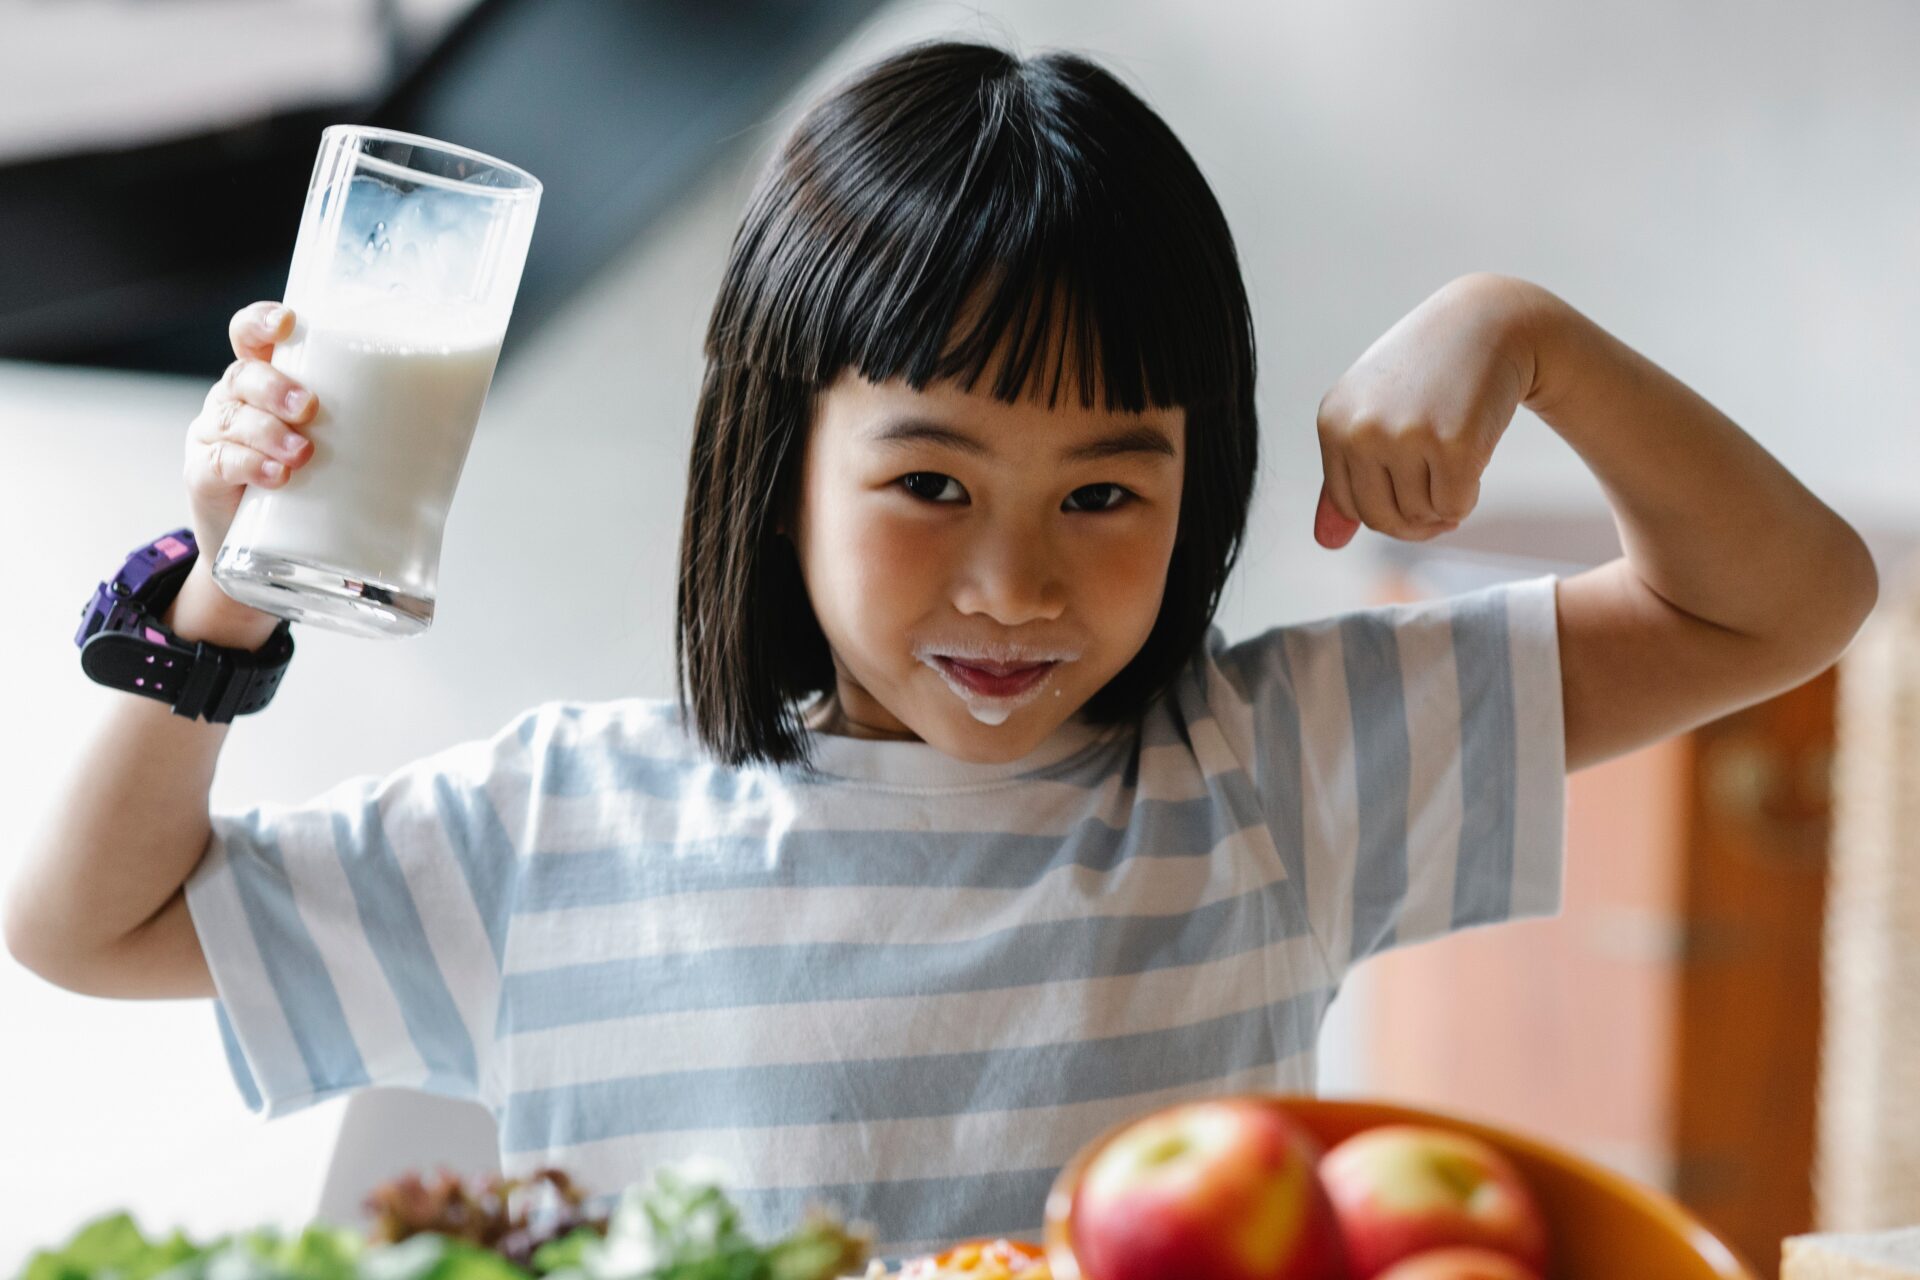 Little girl flexing muscles while drinking a glass of milk